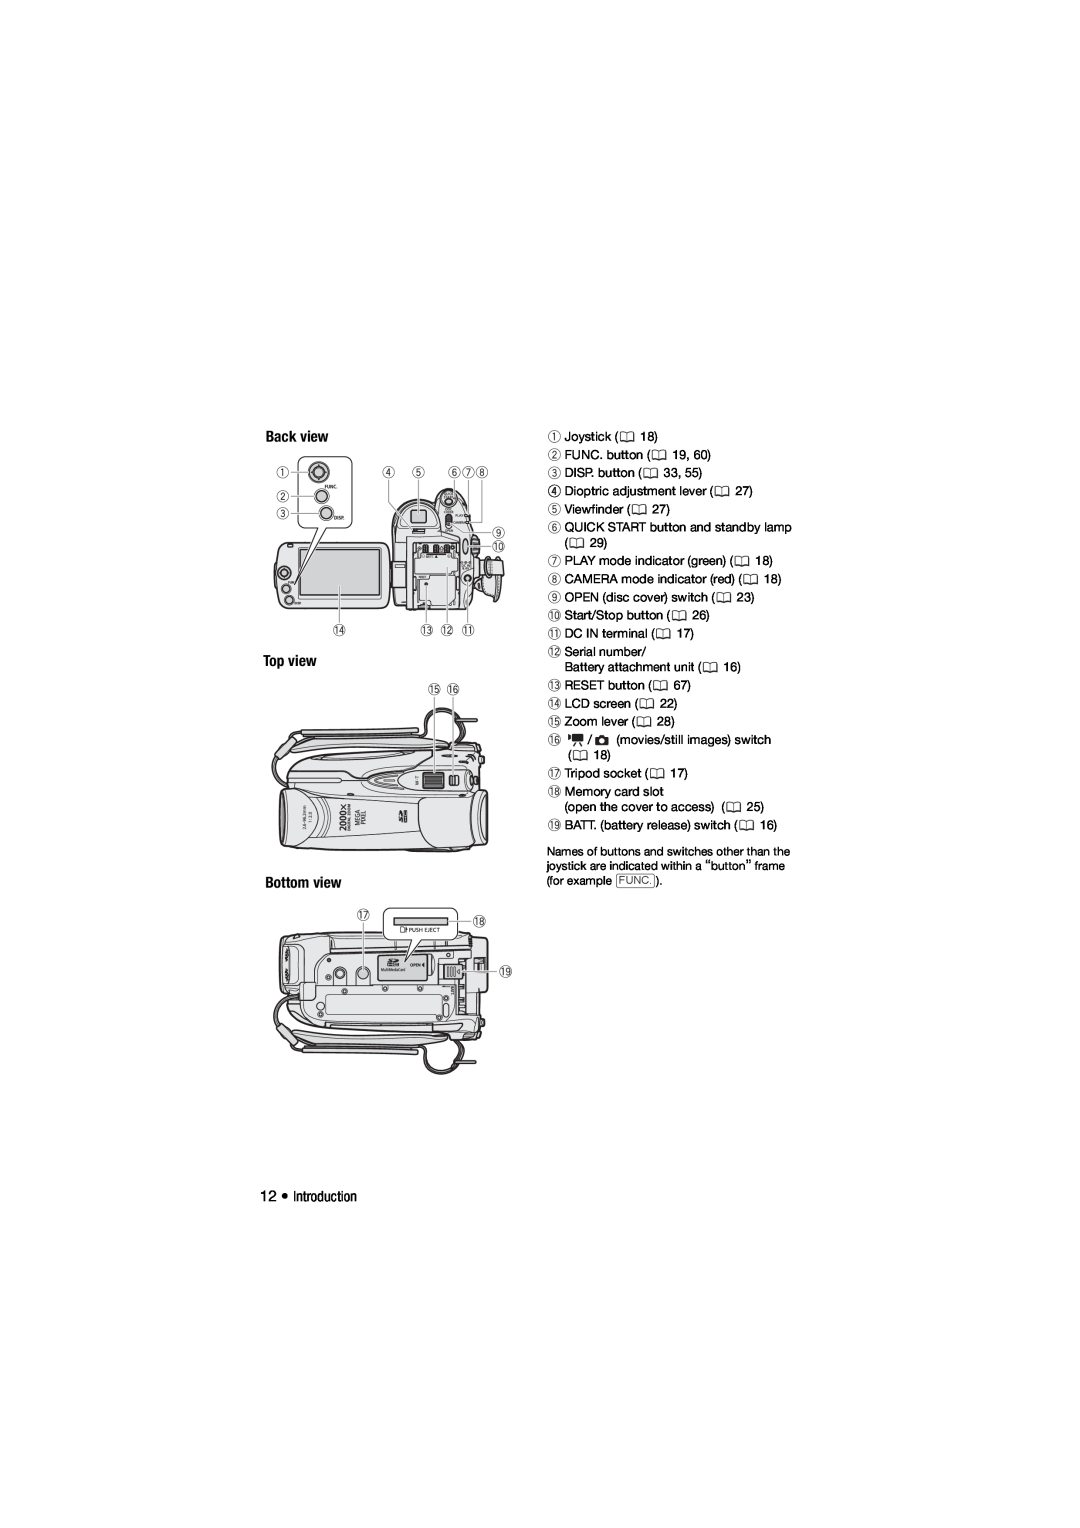 Canon 310, DC311, DC301 instruction manual Back view Top view Bottom view, Introduction 